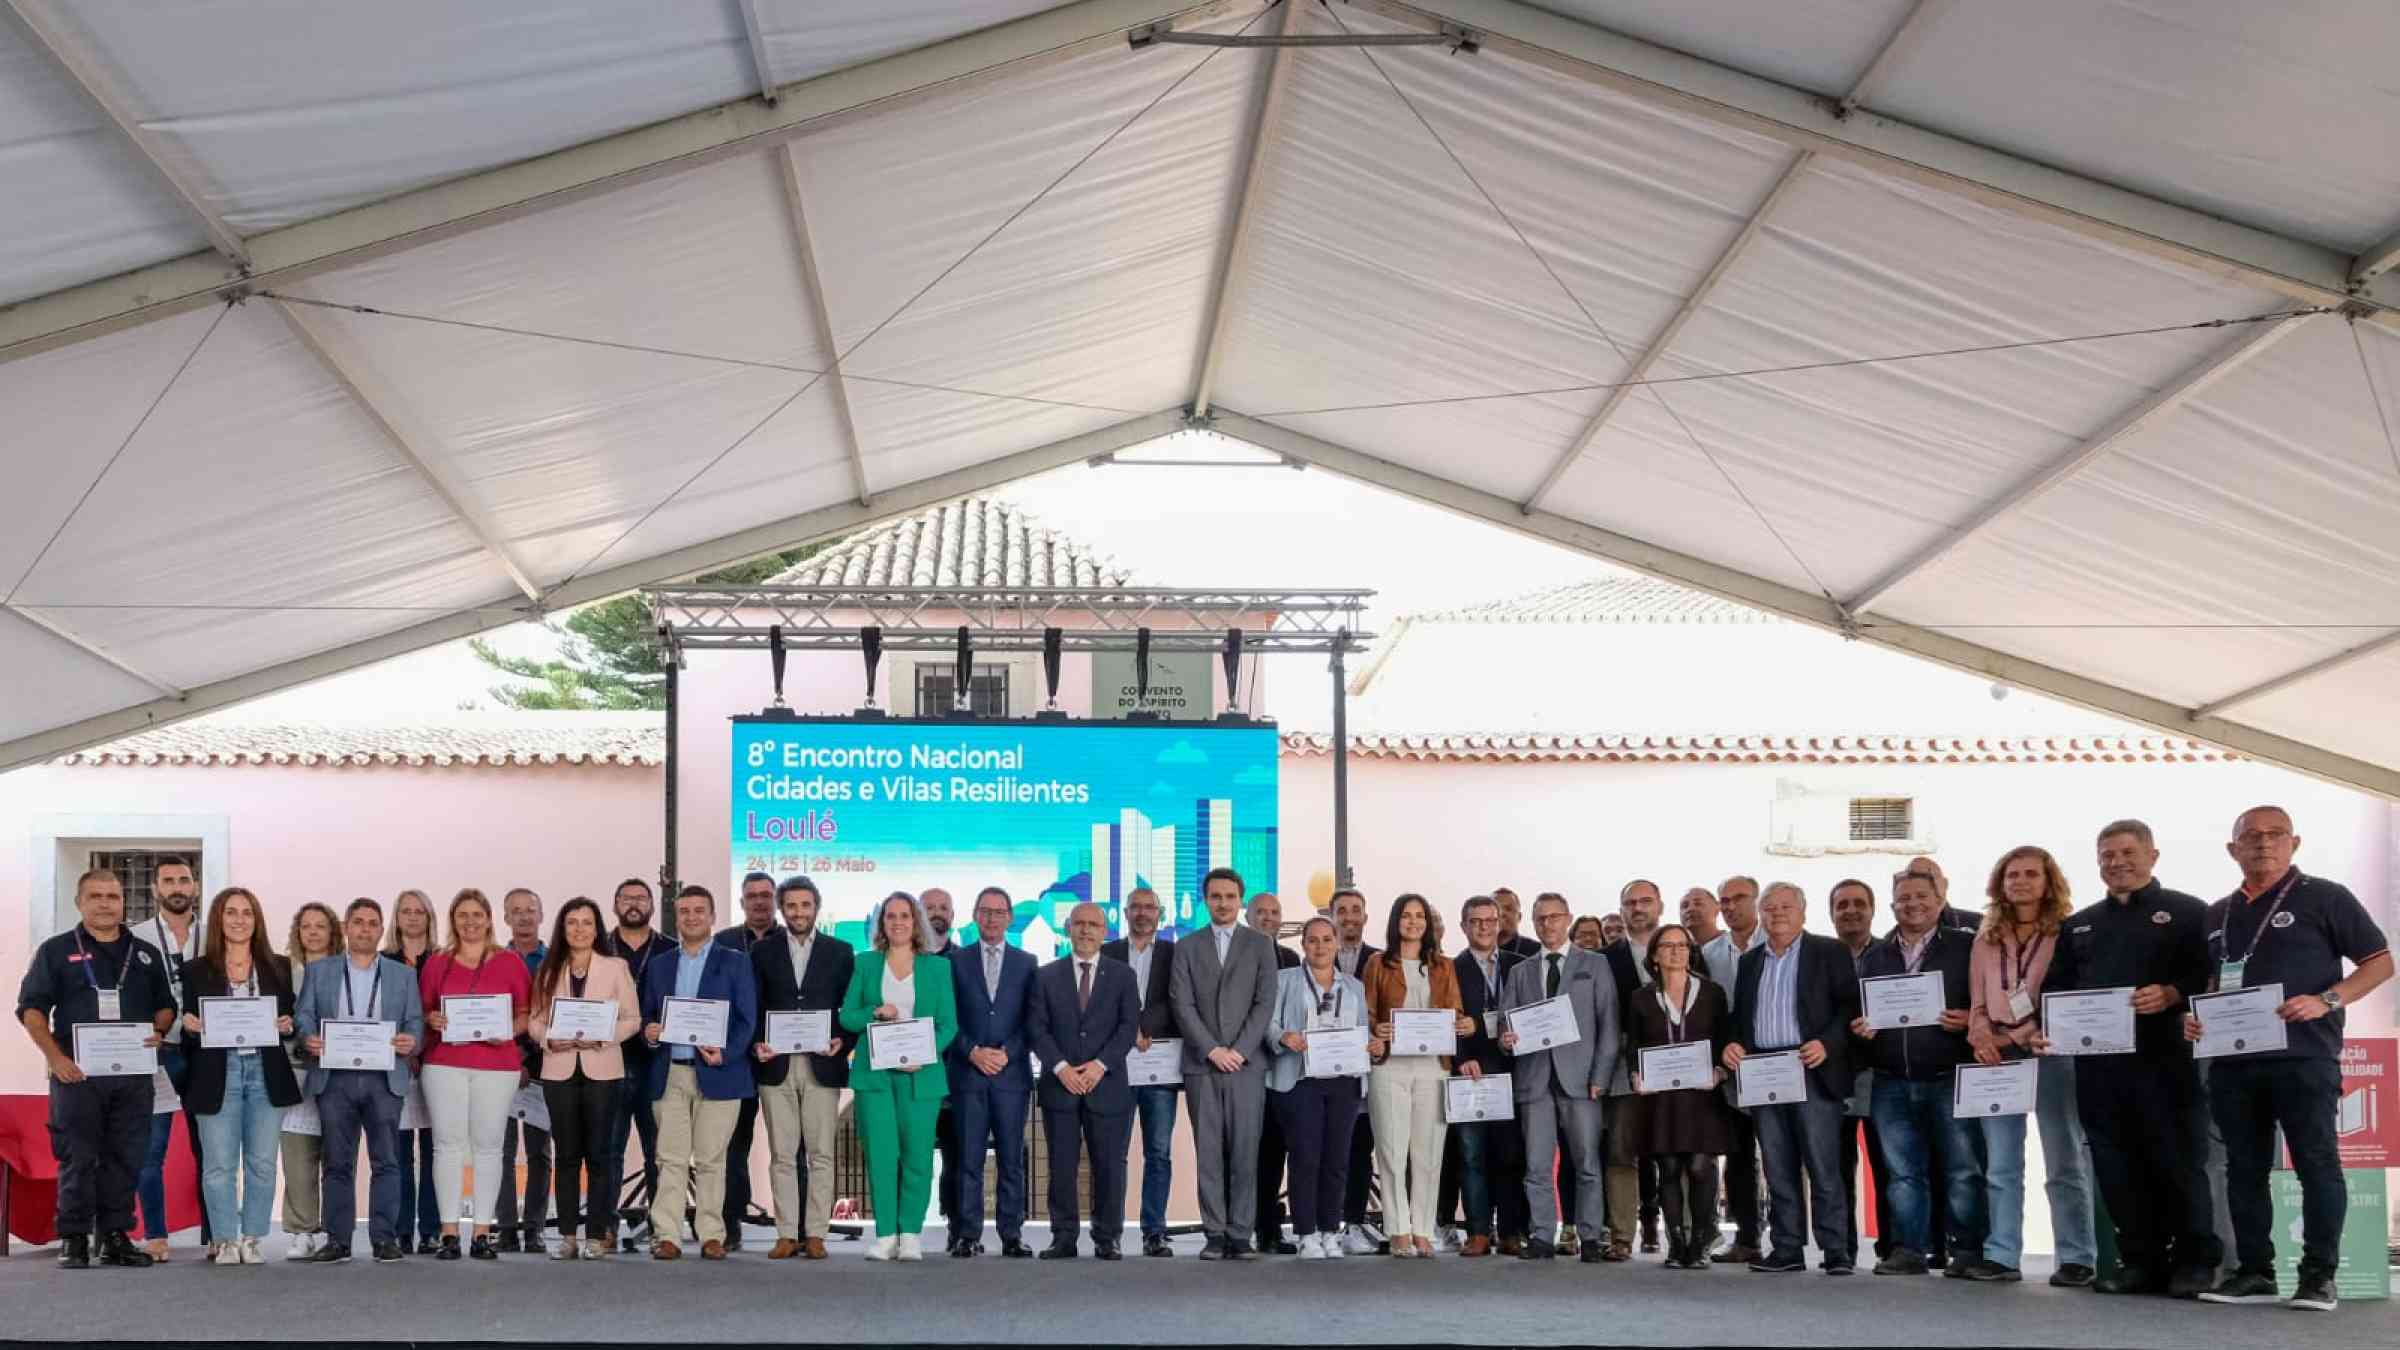 Portuguese Resilient Cities Network 